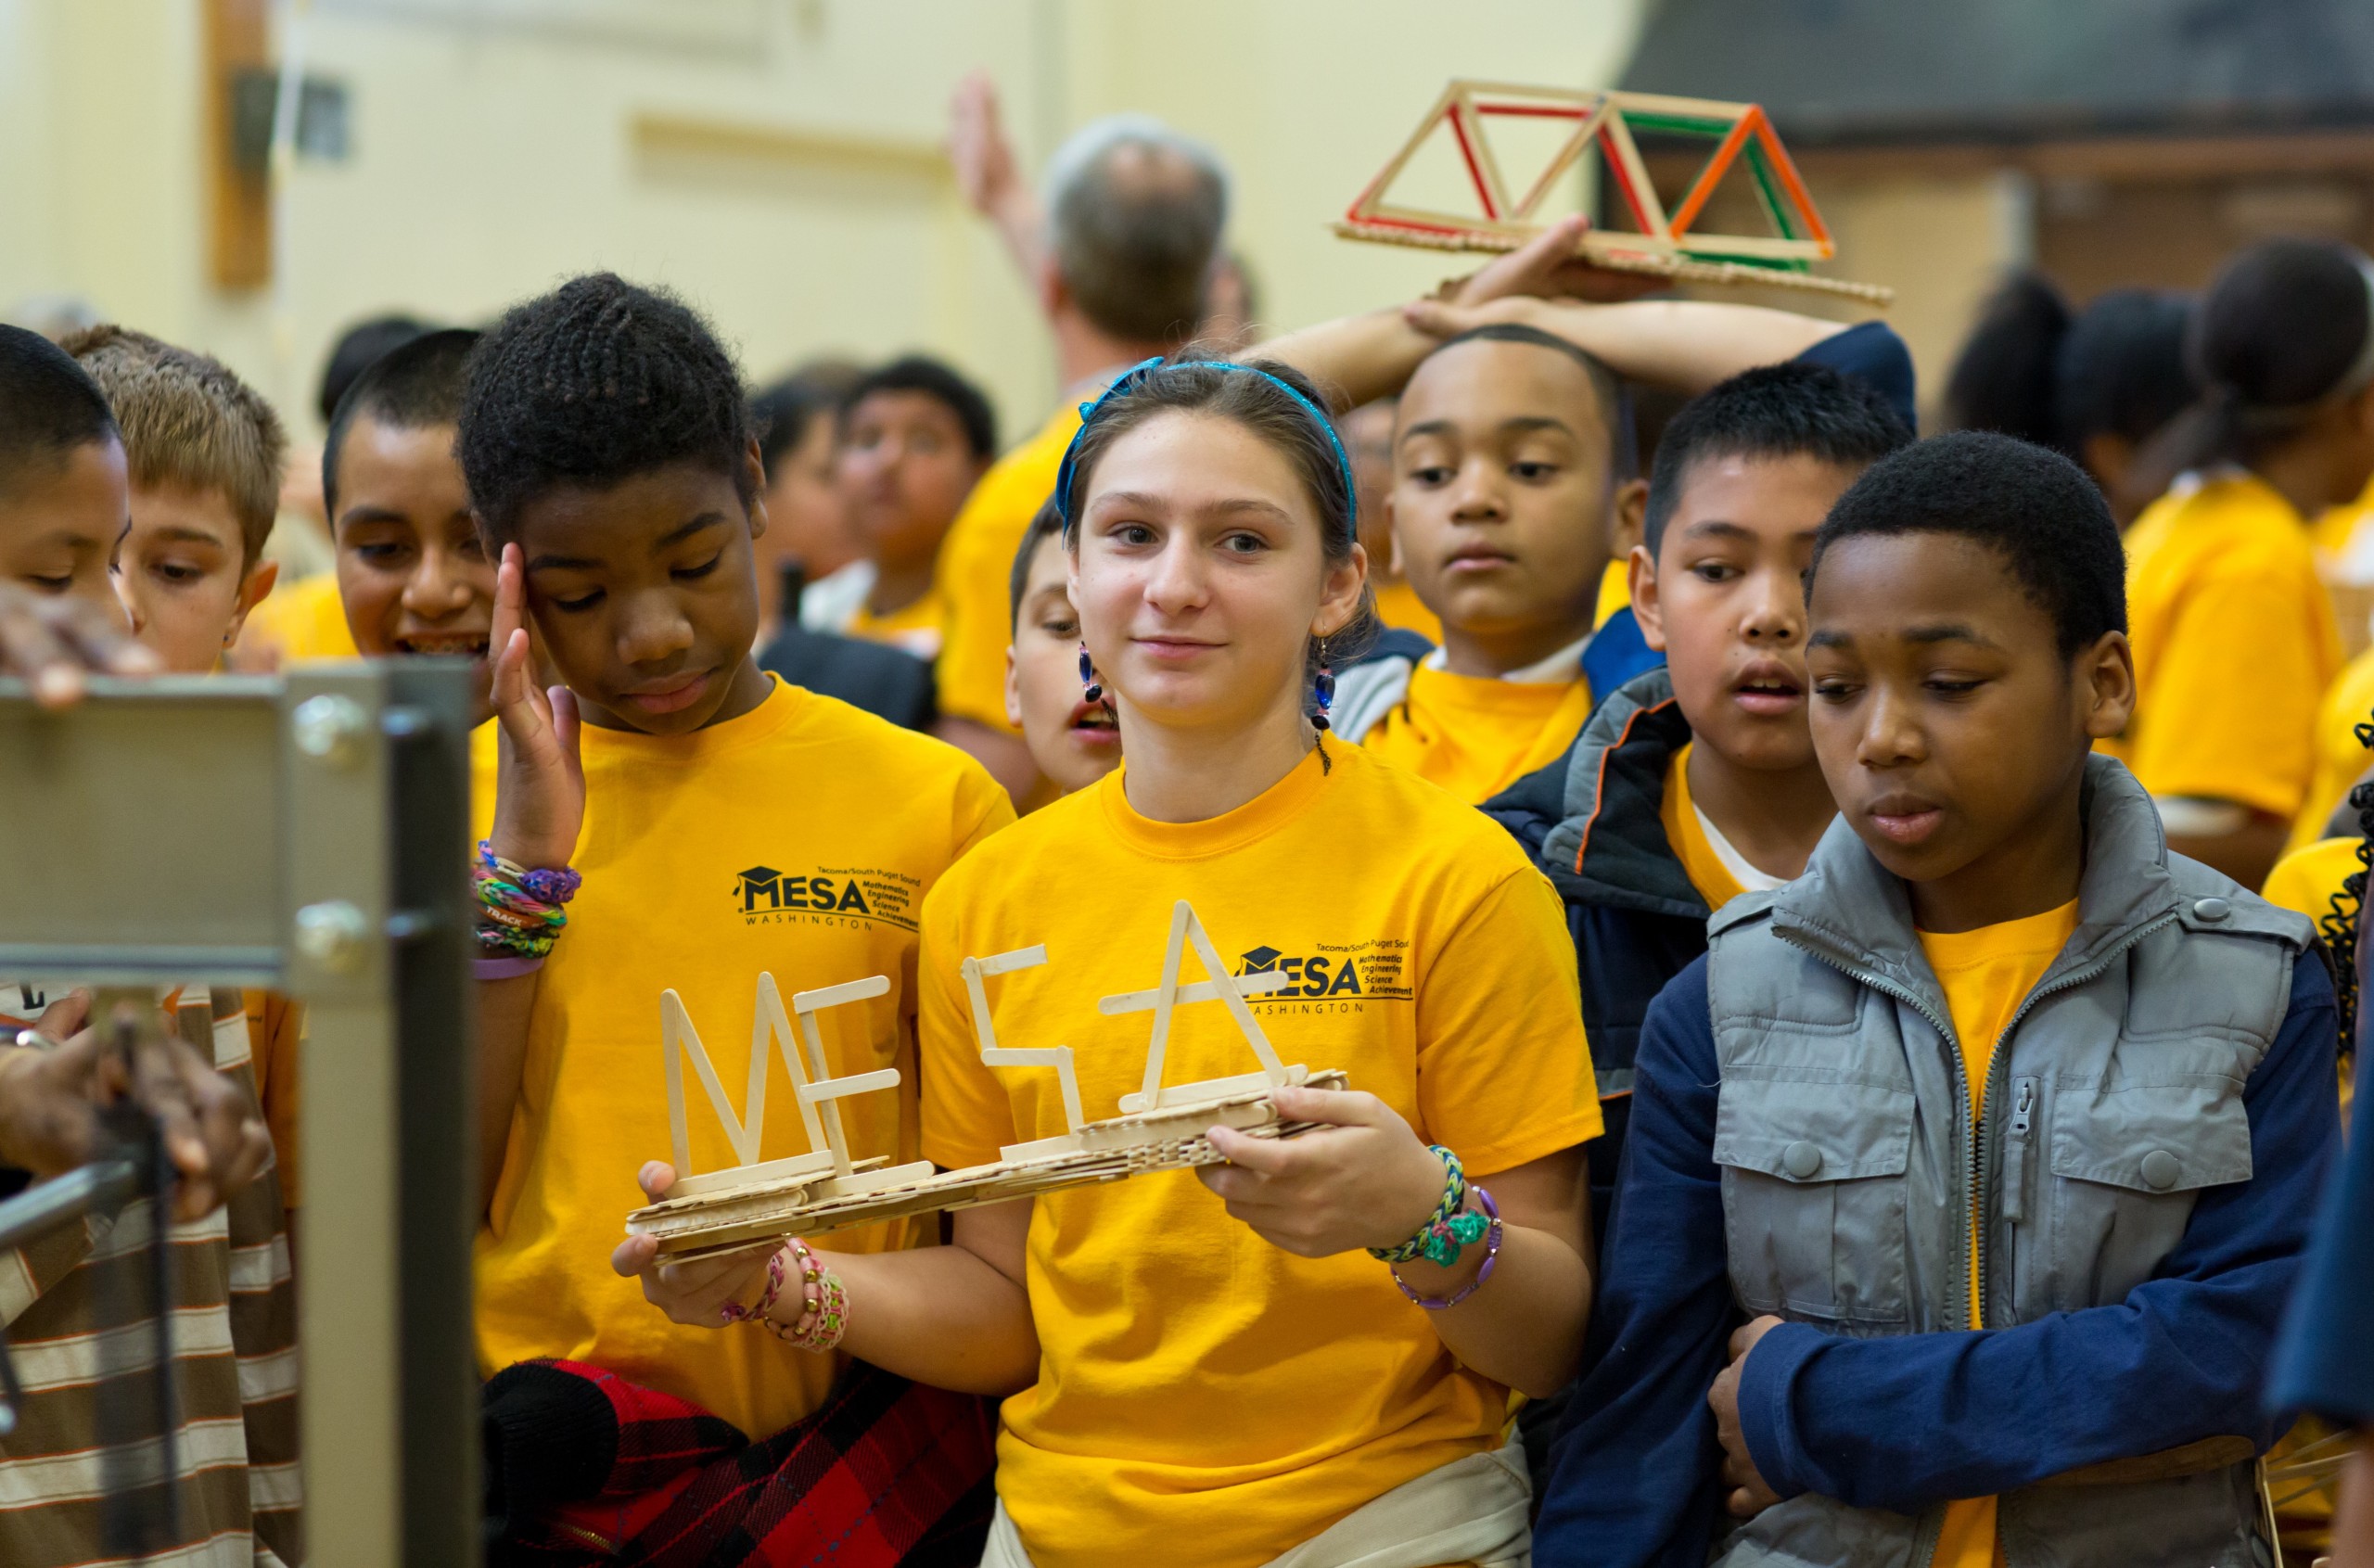 Students gather at PLU for the 2014 MESA Day engineering competition. (Photo: John Froschauer/PLU)